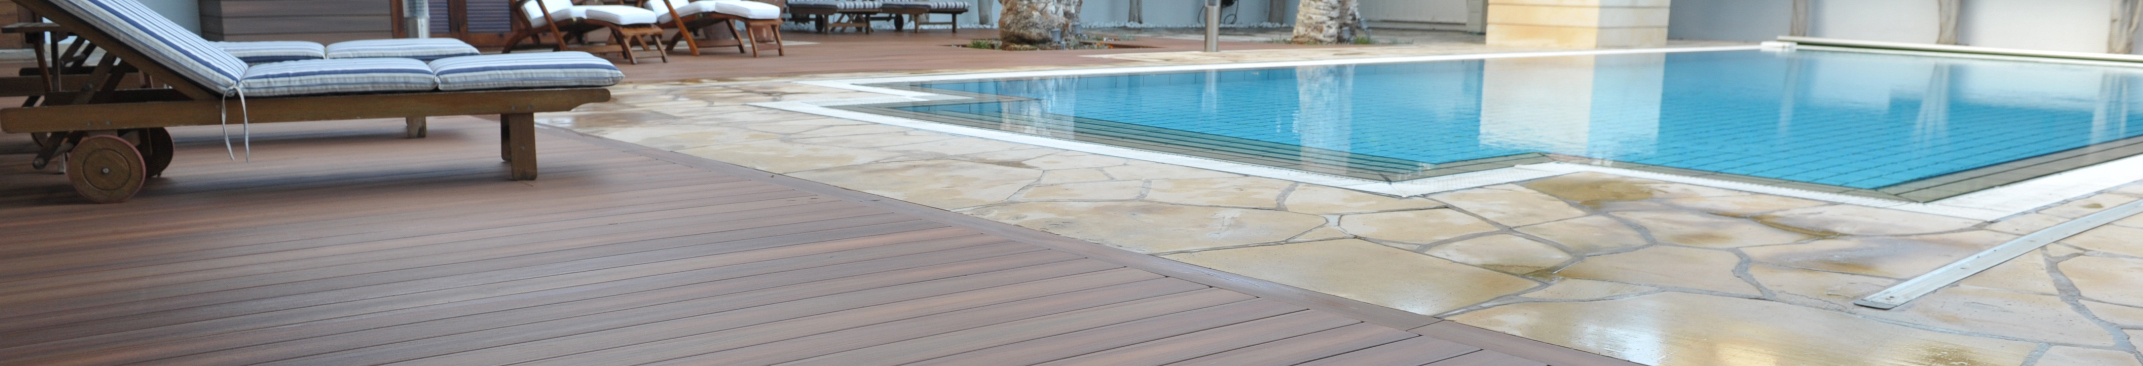 What Deck Materials Should You Use Around Your Outdoor Spa